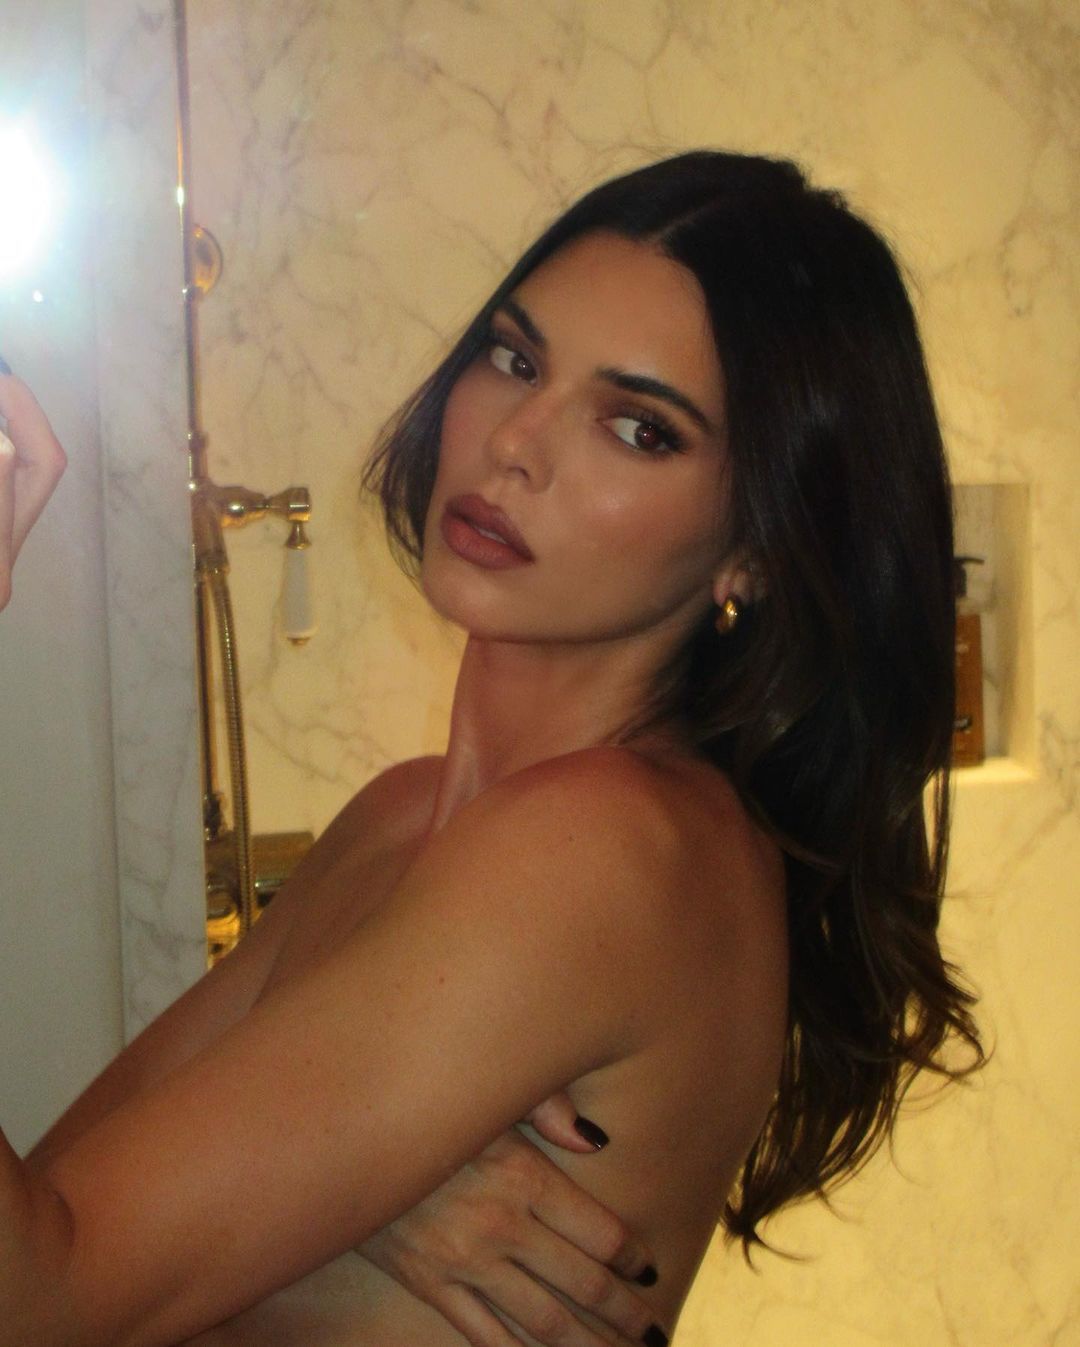 Kendall Kardashian Nude Porn - Kendall Jenner Poses Totally Topless in New Glamorous Selfies